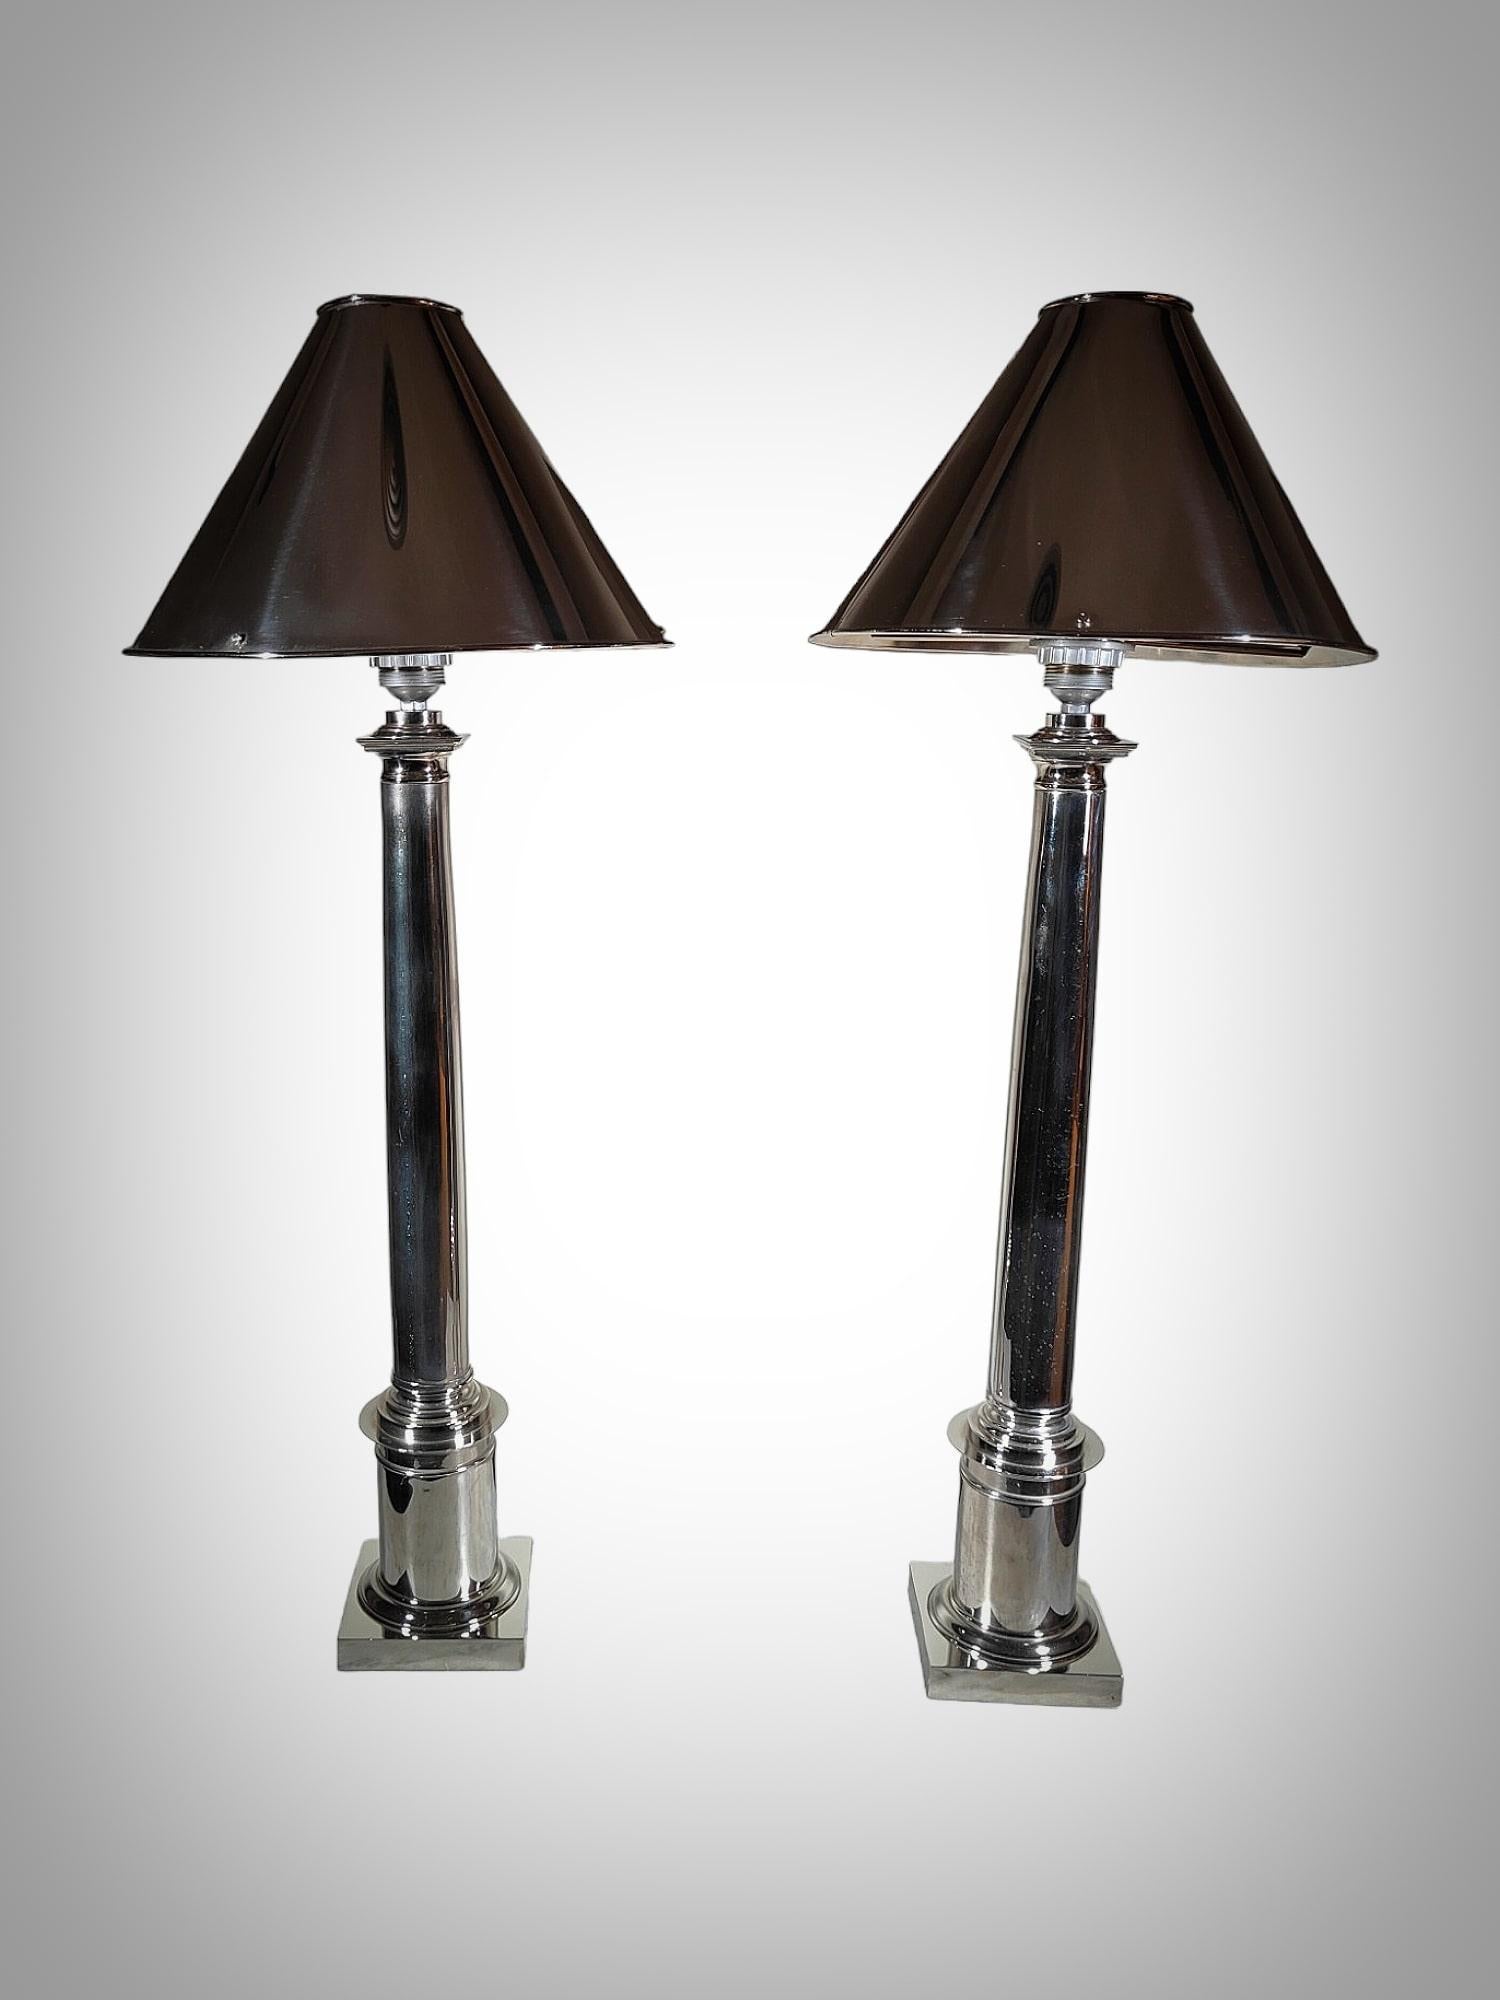 Mid-20th Century Elegant Architectural Design Bronze Lamps from the 1970s For Sale